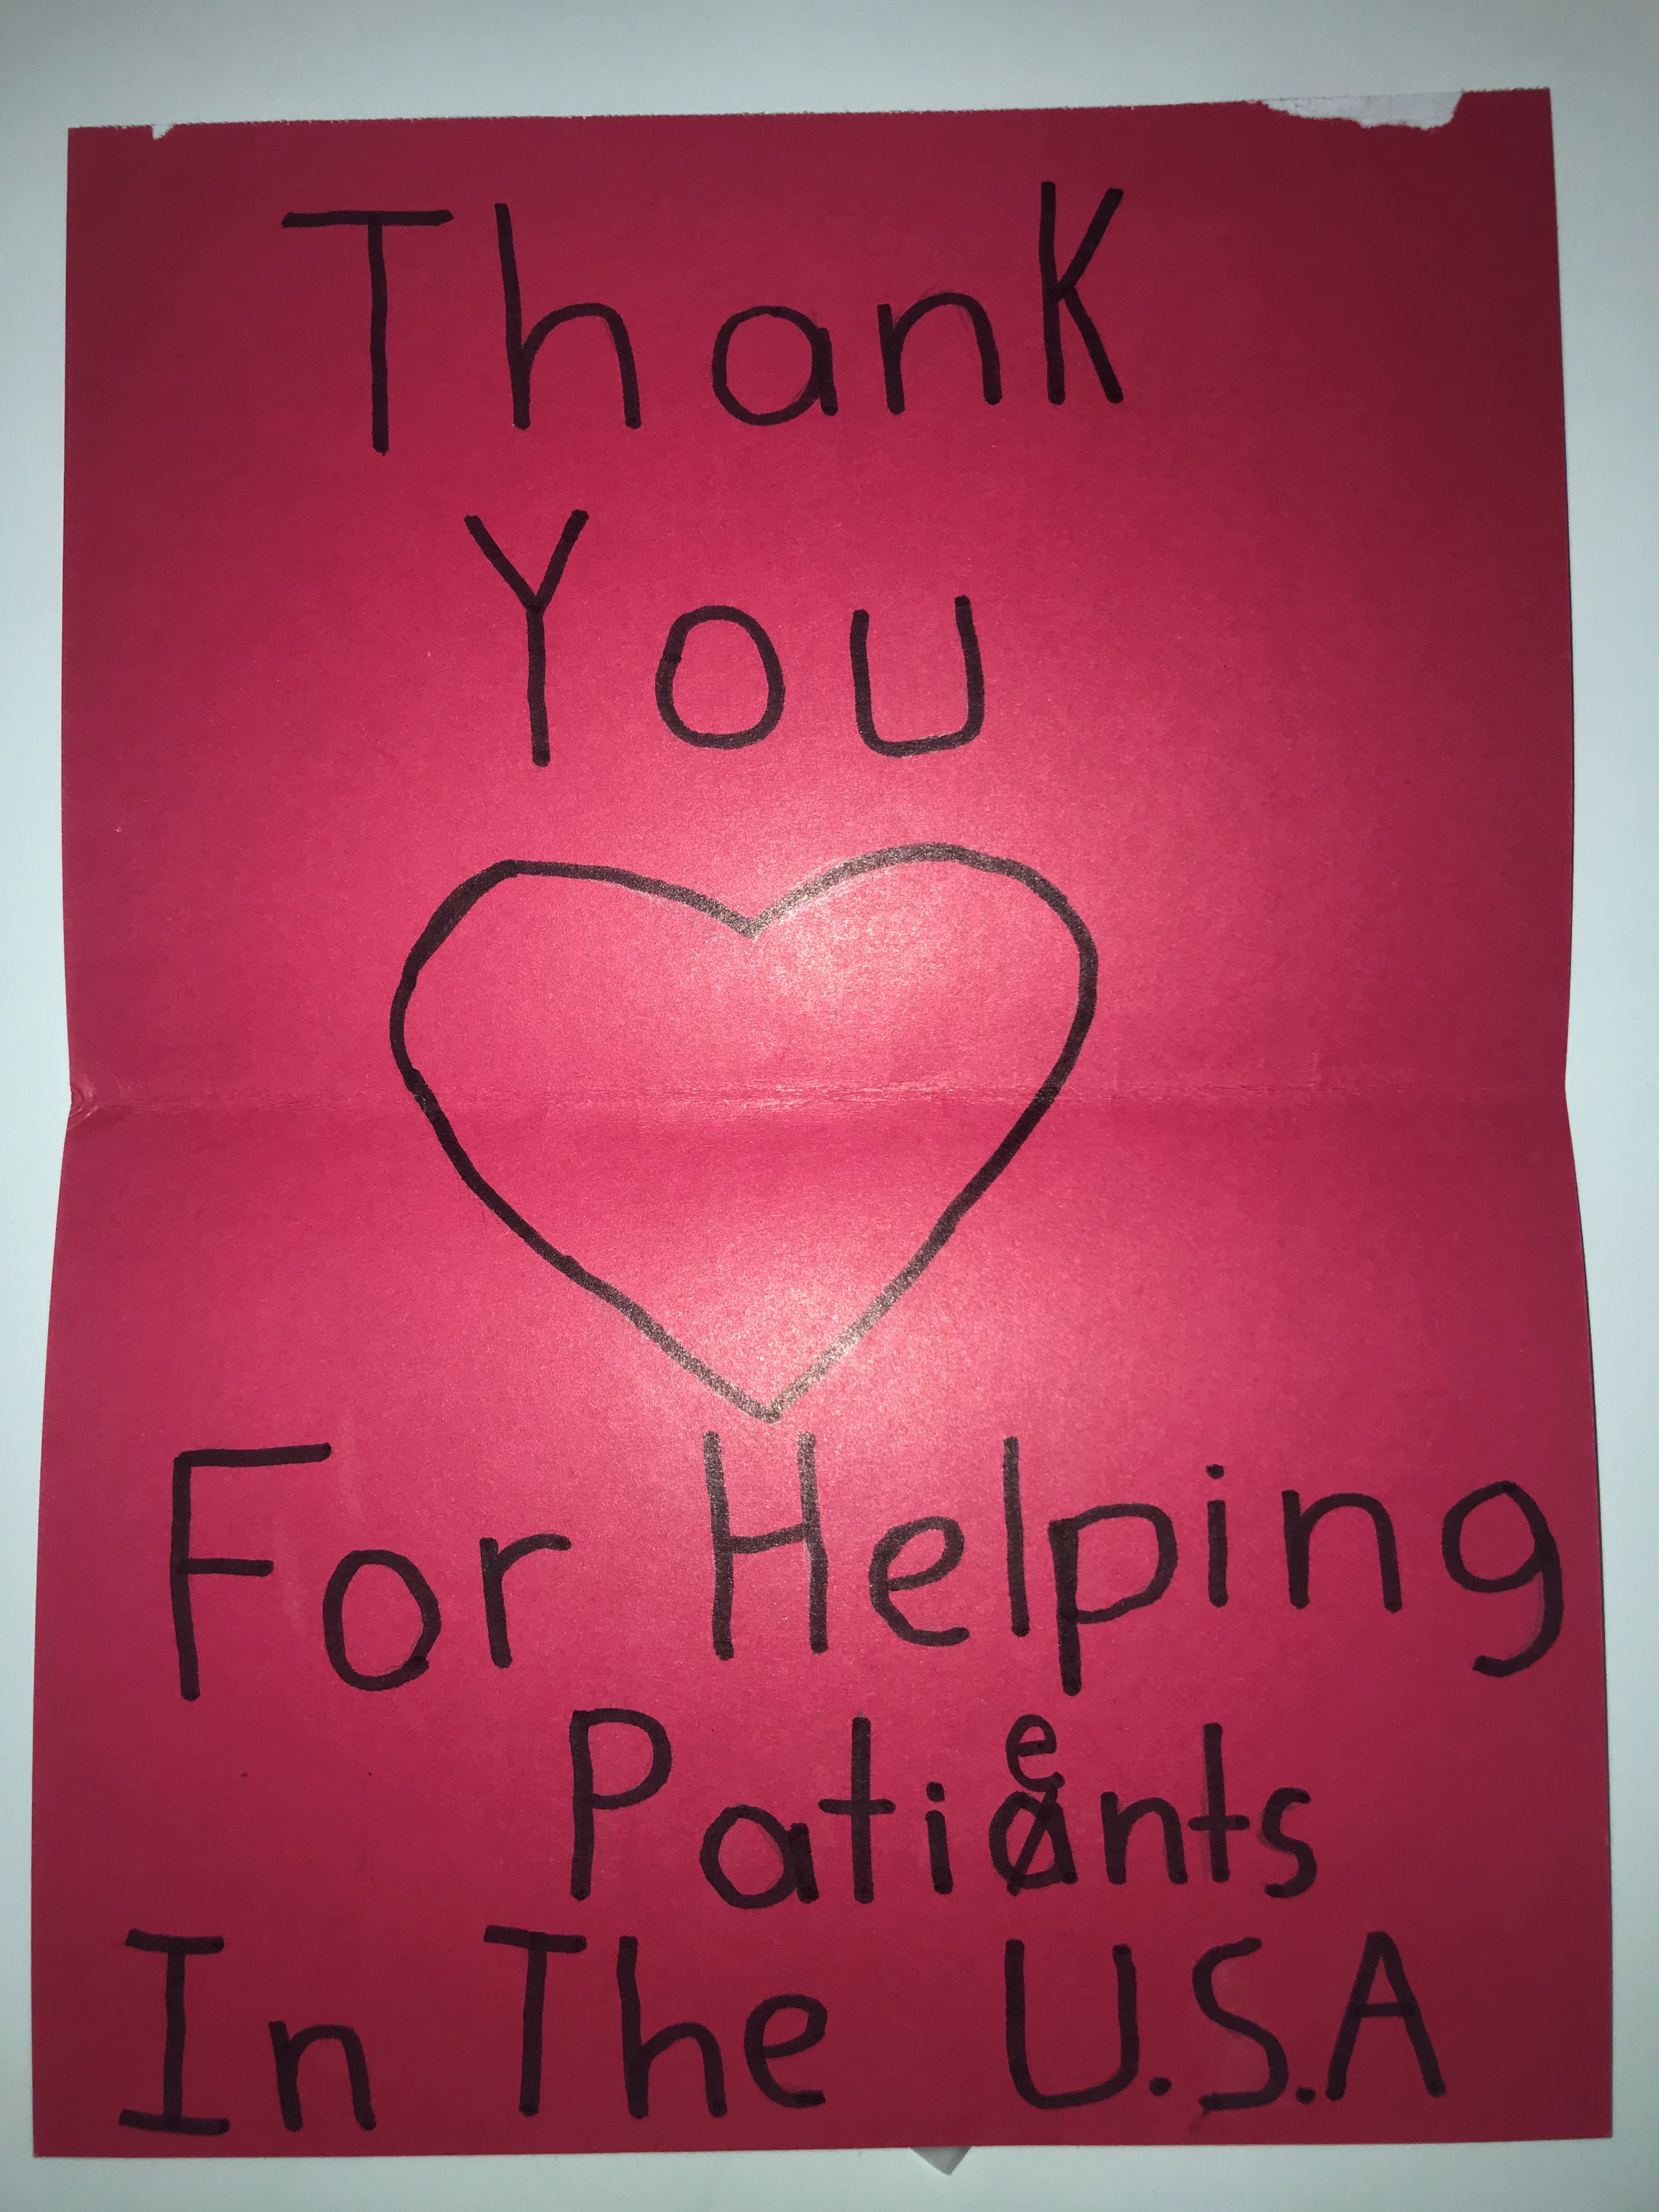 Thank you for helping patients in the U.S.A.